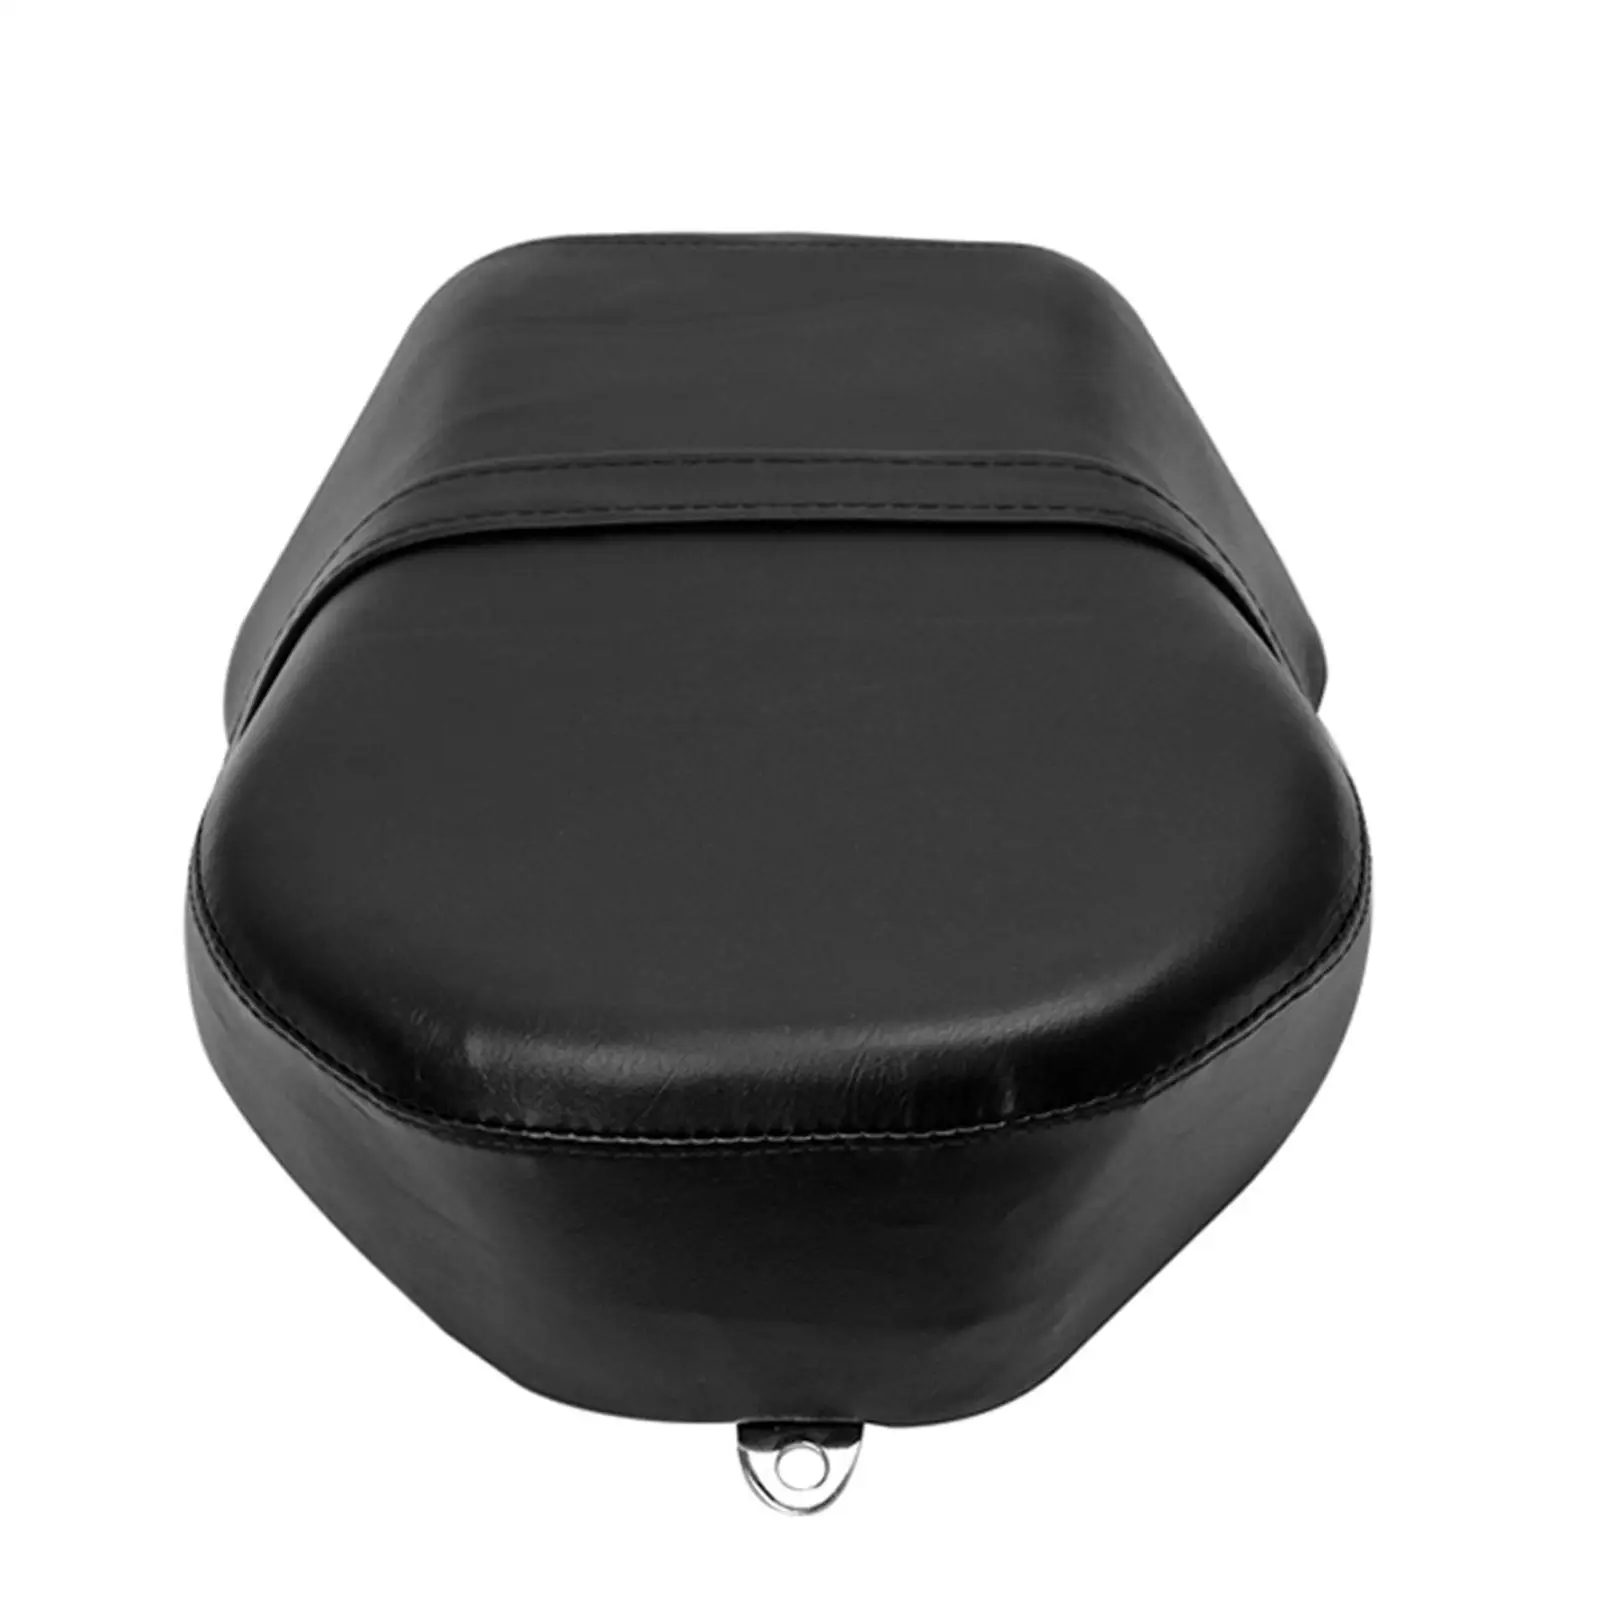 Motorcycle Pillion Passenger Pad Motorcycle Passenger Seat Cushion for Harley Sportster 883 1200 Professional Durable